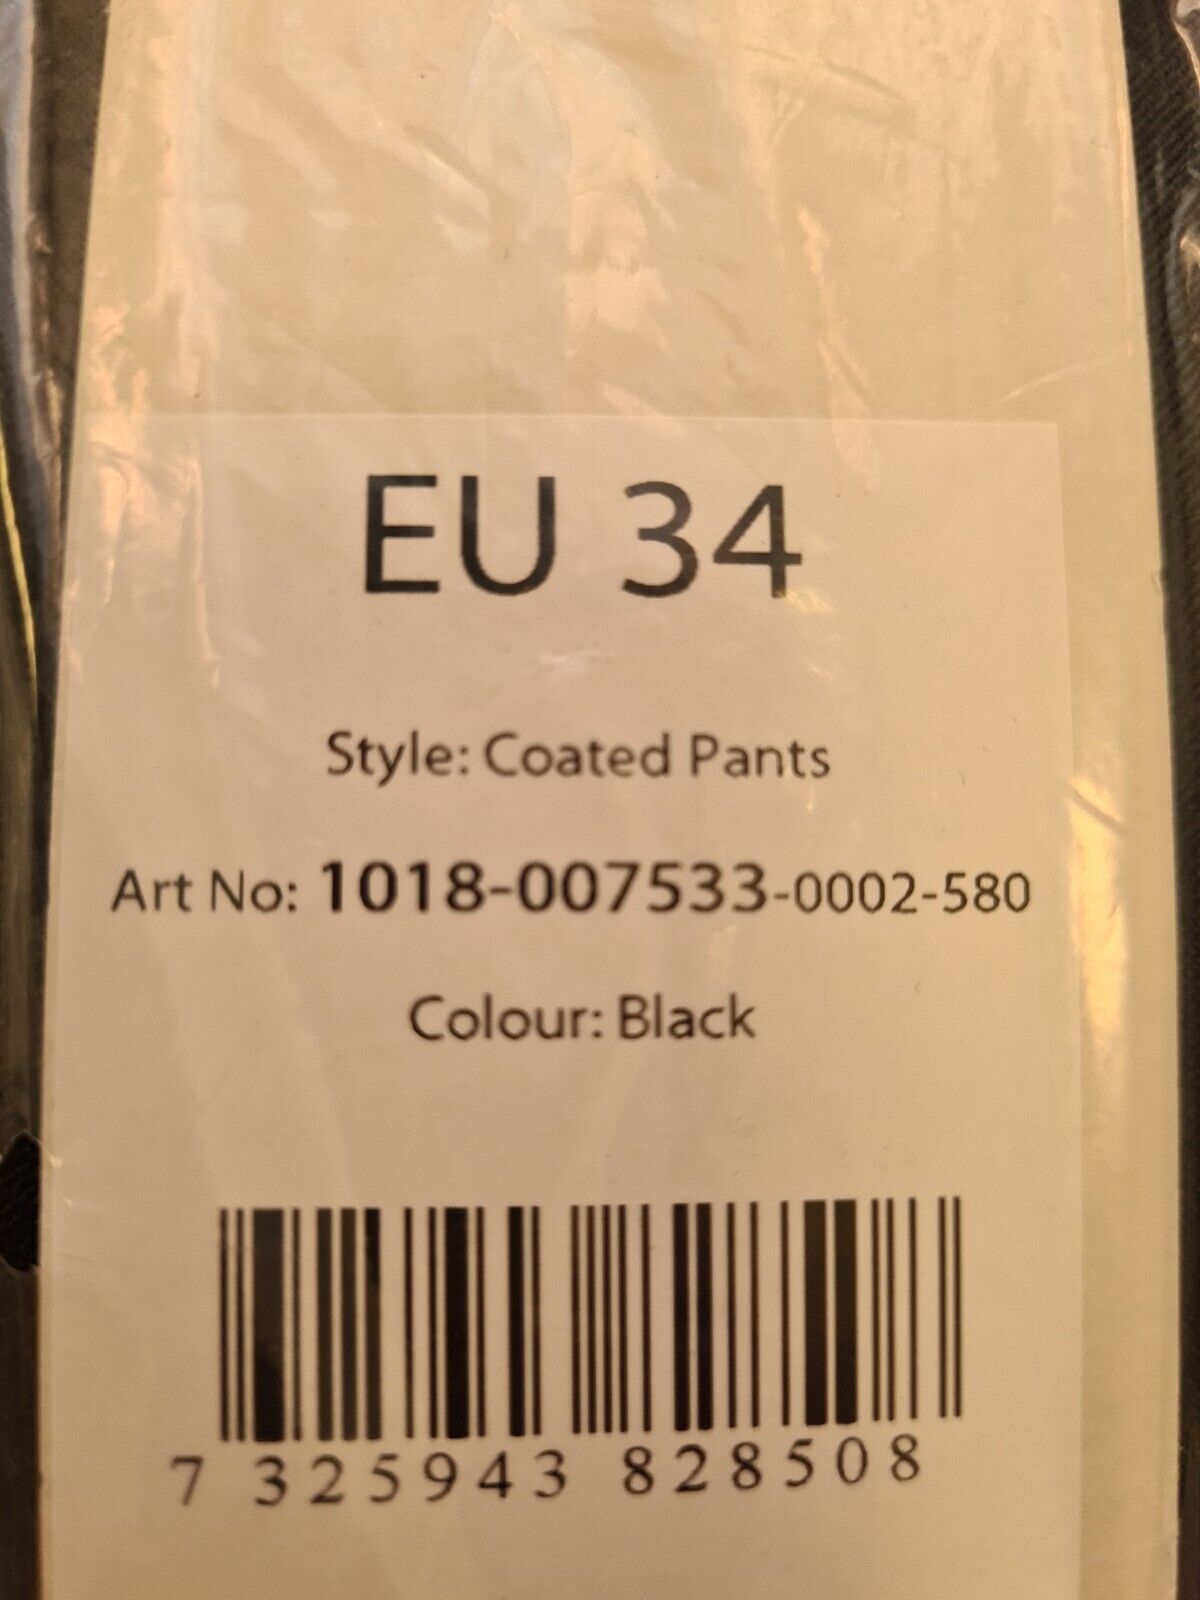 NA-KD Nothing But Style Black Leather Jeans. UK 8 **** Ref V31